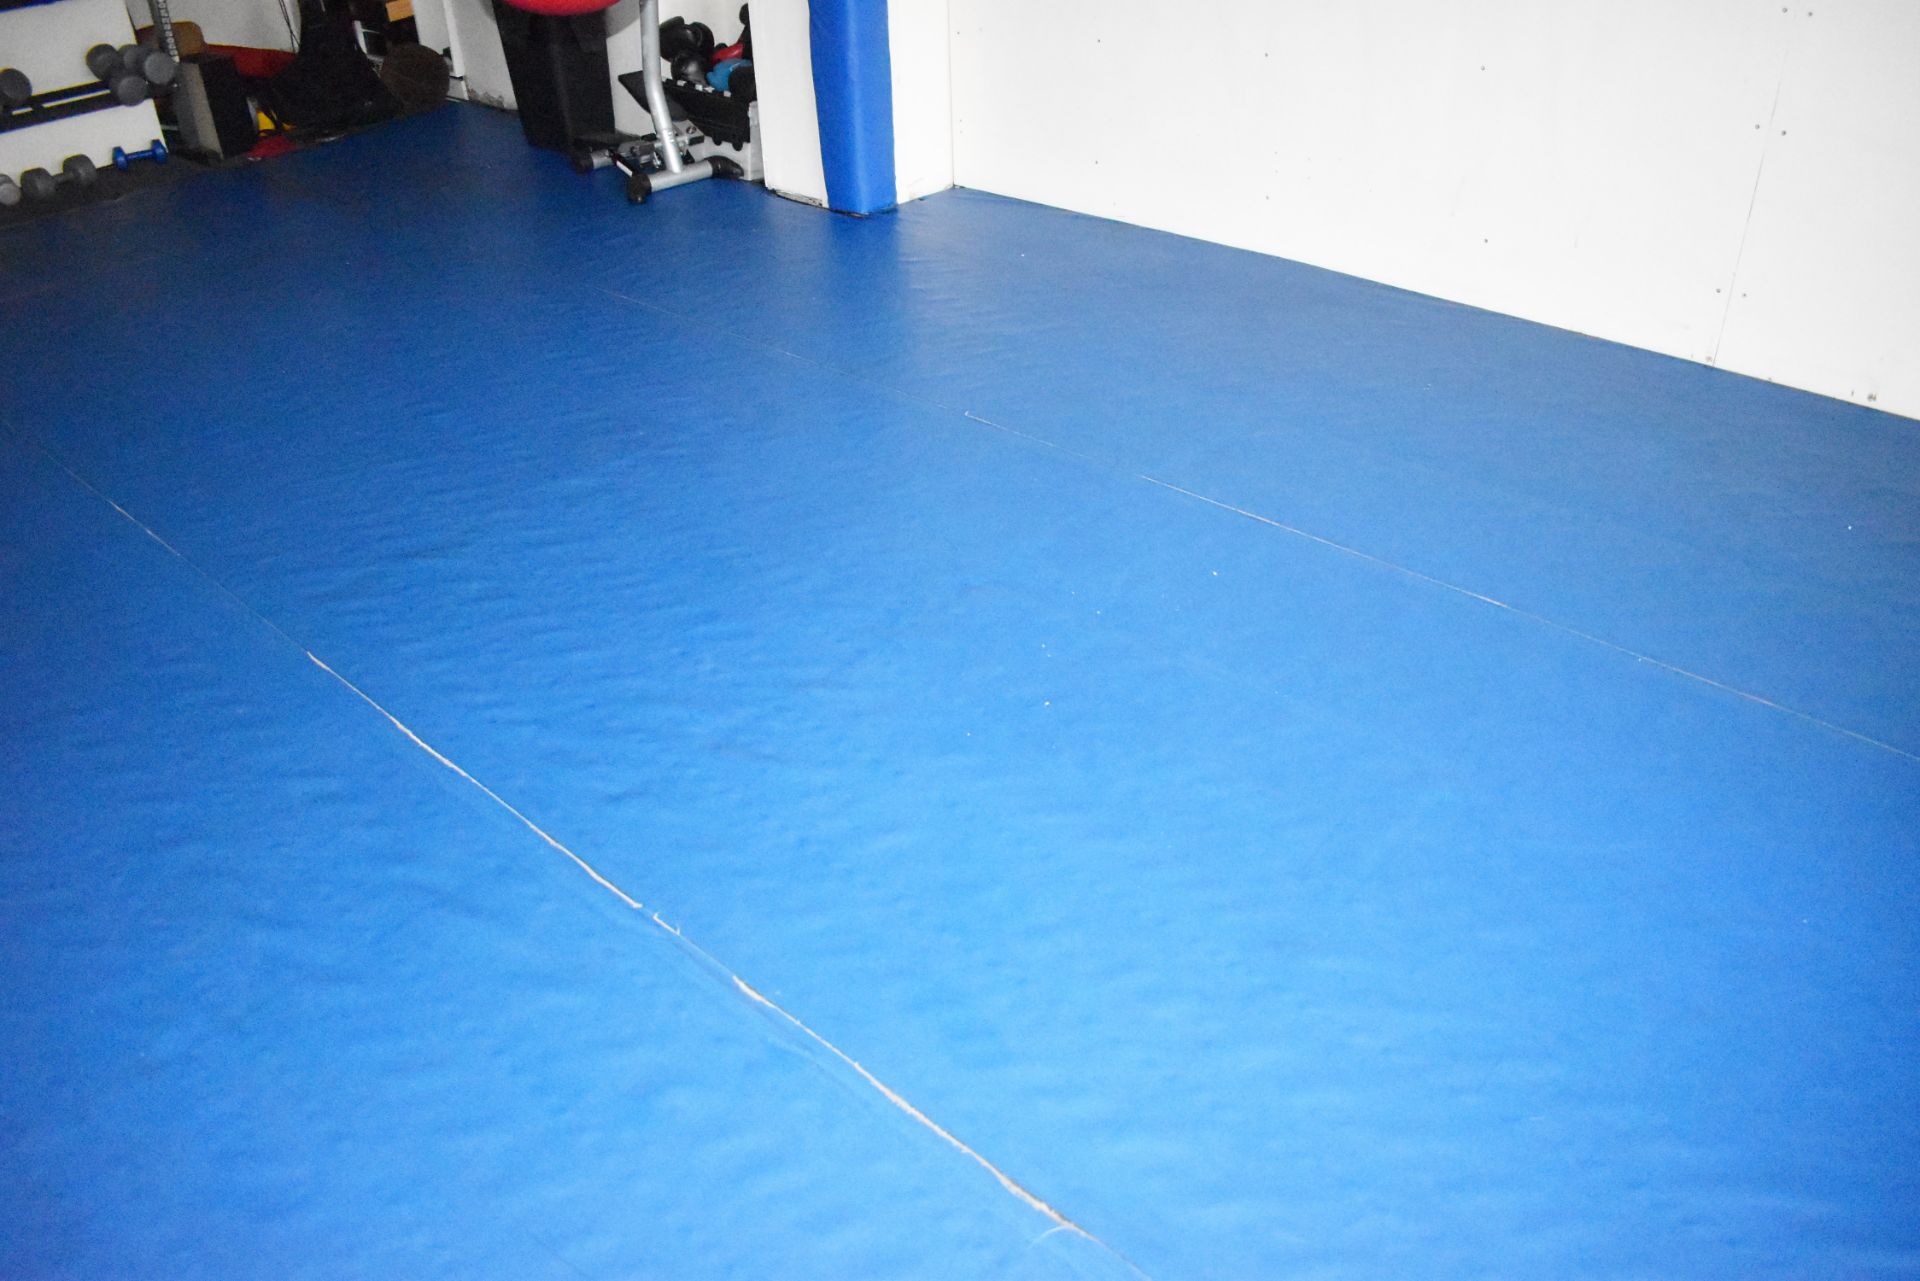 1 x Martial Arts Padded Floor With Easy Clean Surface - Good Condition - Total Width 420cms x - Image 4 of 7